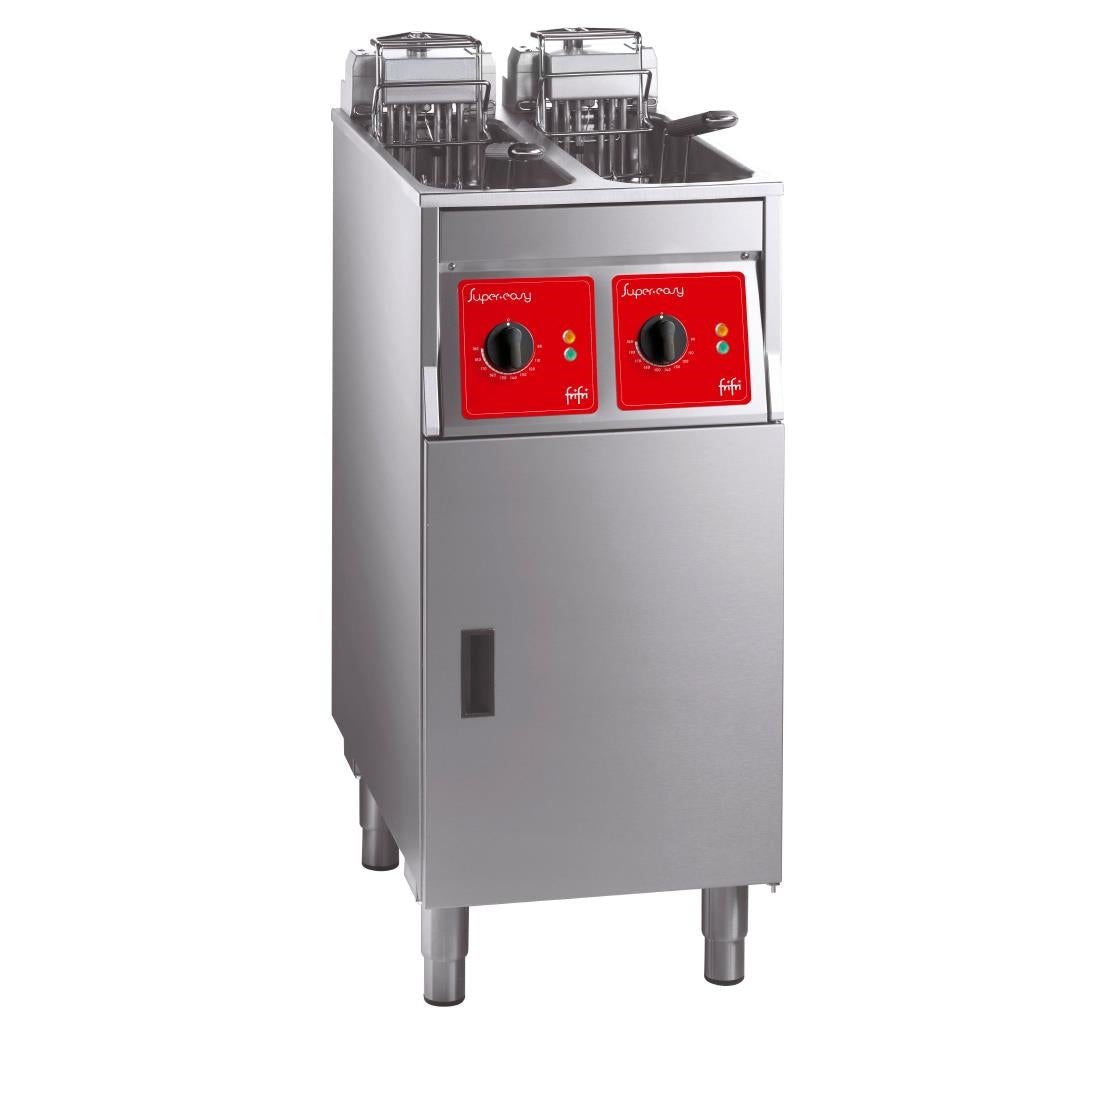 HS066-1PH FriFri Super Easy 422 Electric Free-Standing Twin Tank Fryer without Filtration 2 Baskets 2x 7.5kW - Single Phase